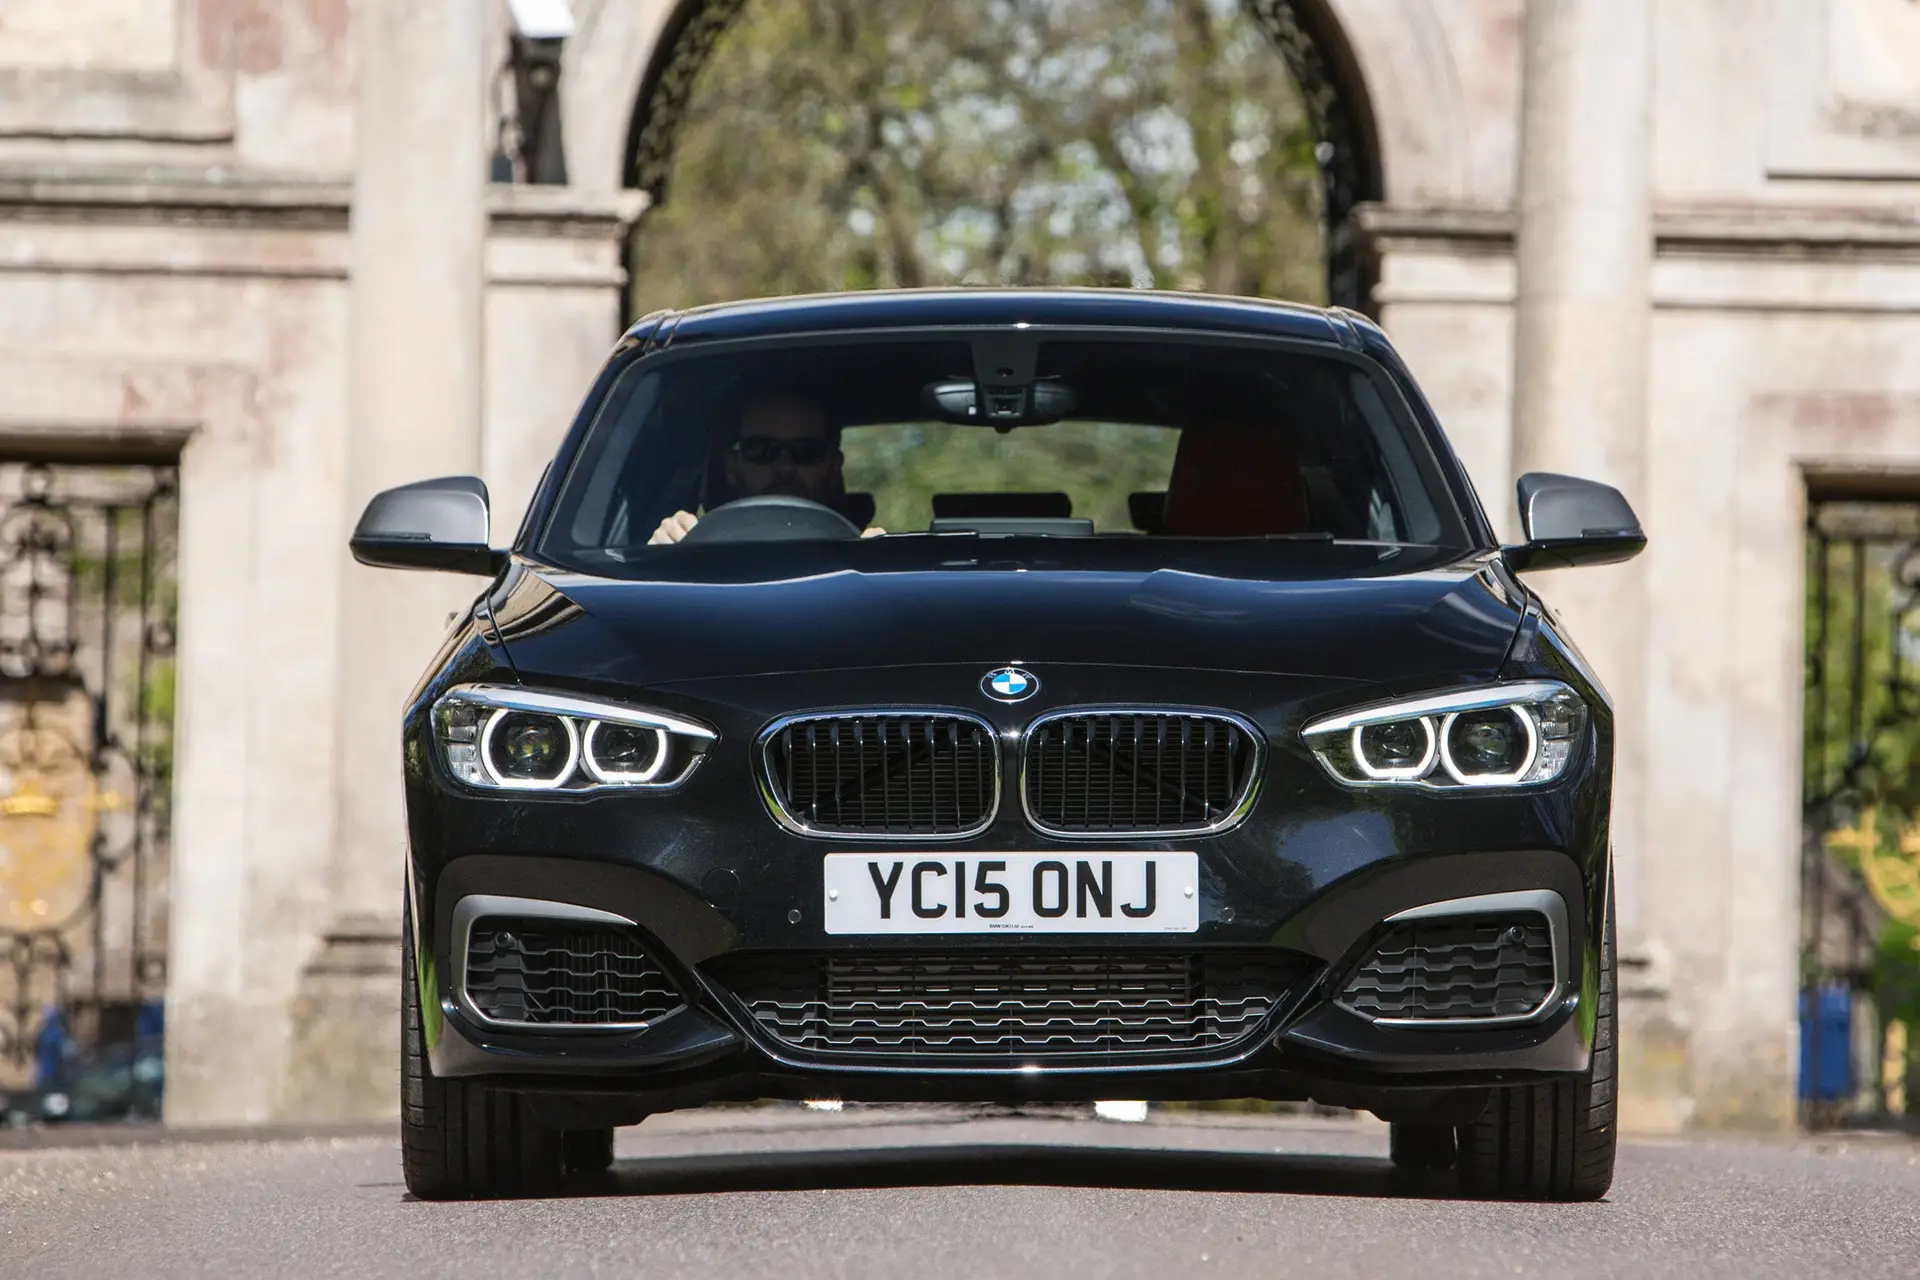 BMW 1 Series (2011-2019) Review: exterior front photo of the BMW 1 Series 